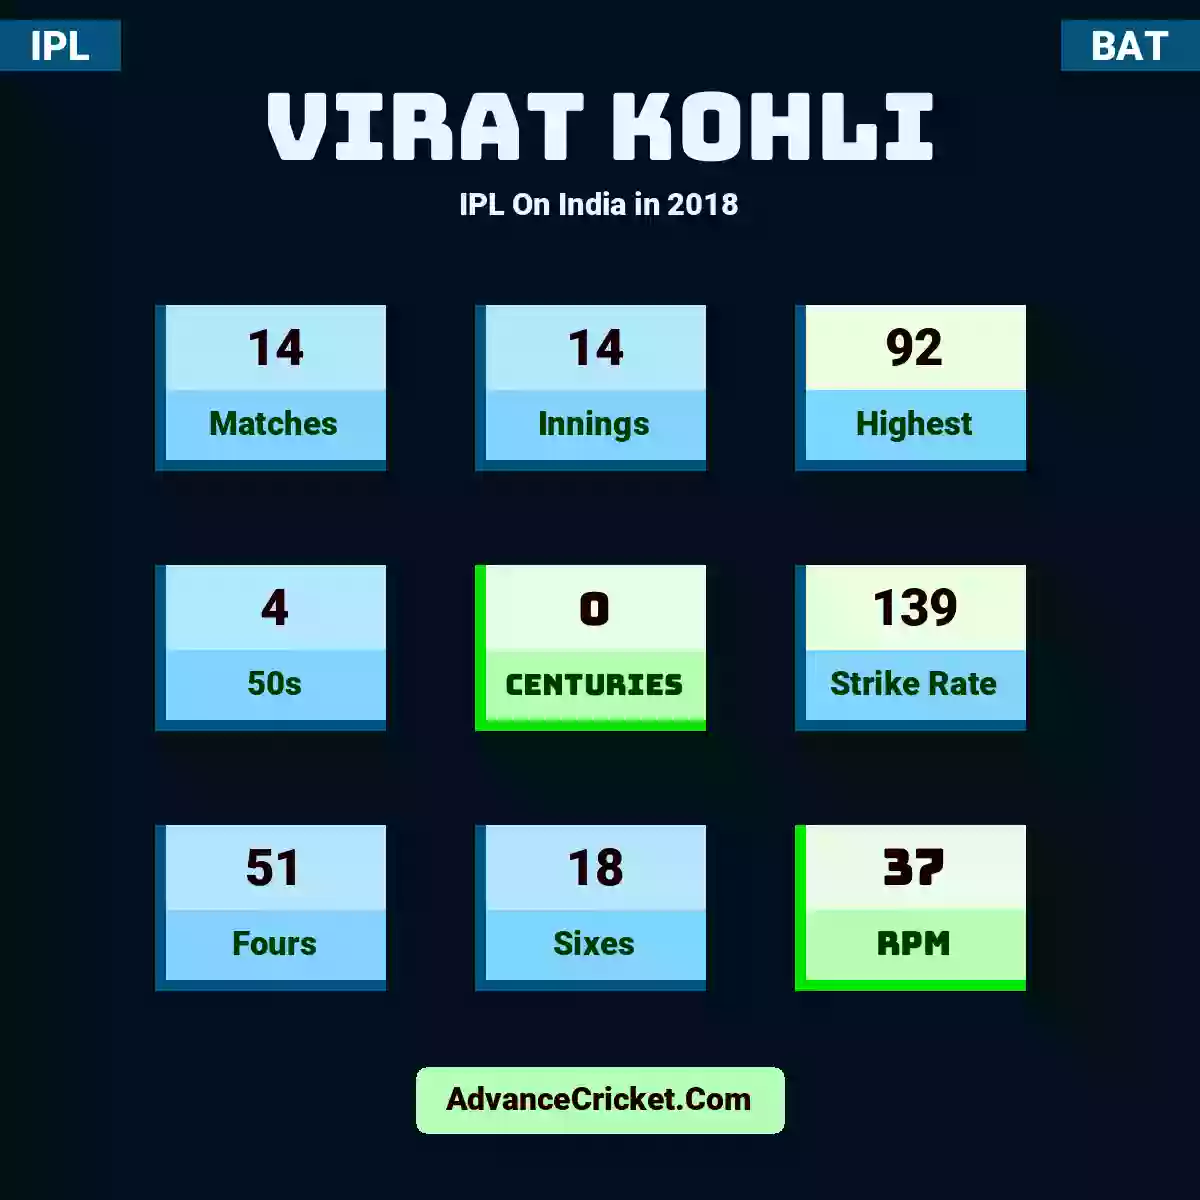 Virat Kohli IPL  On India in 2018, Virat Kohli played 14 matches, scored 92 runs as highest, 4 half-centuries, and 0 centuries, with a strike rate of 139. V.Kohli hit 51 fours and 18 sixes, with an RPM of 37.